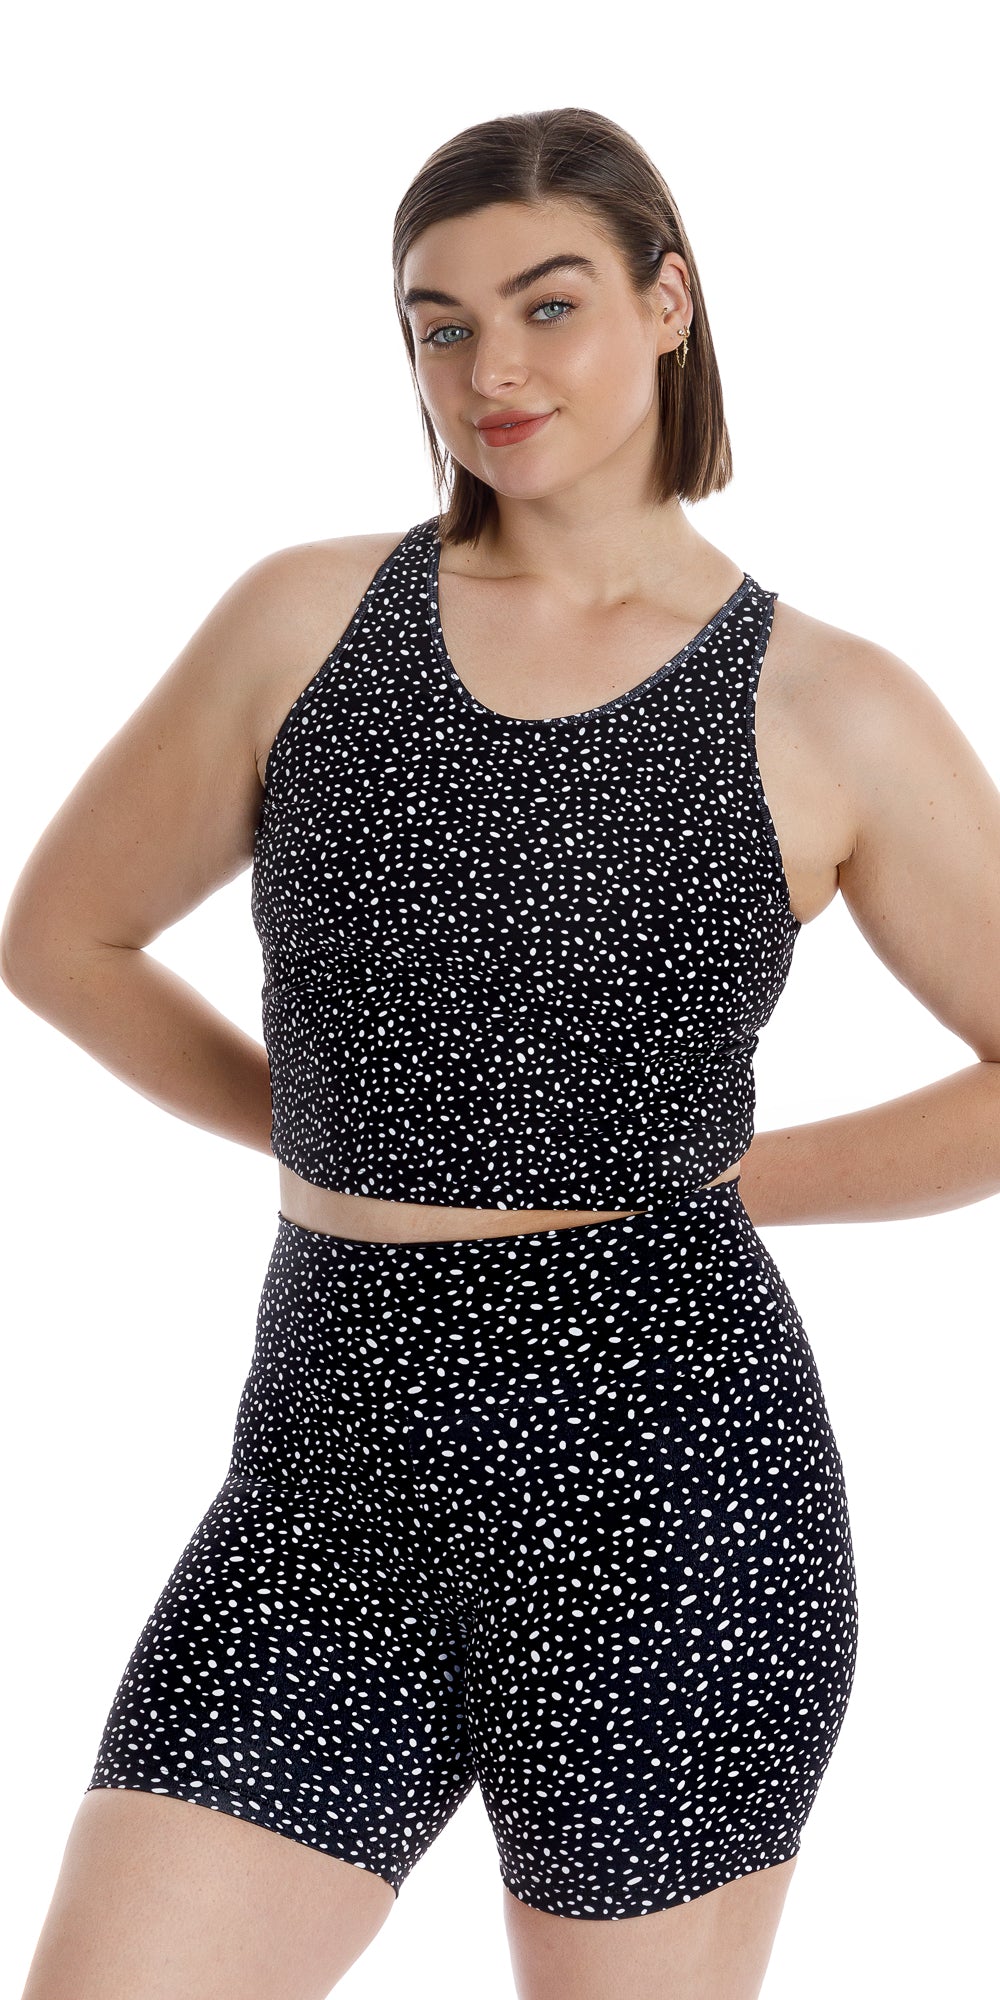 Front view of girl in black Star Dust Crop Top and matching shorts putting both arms behind